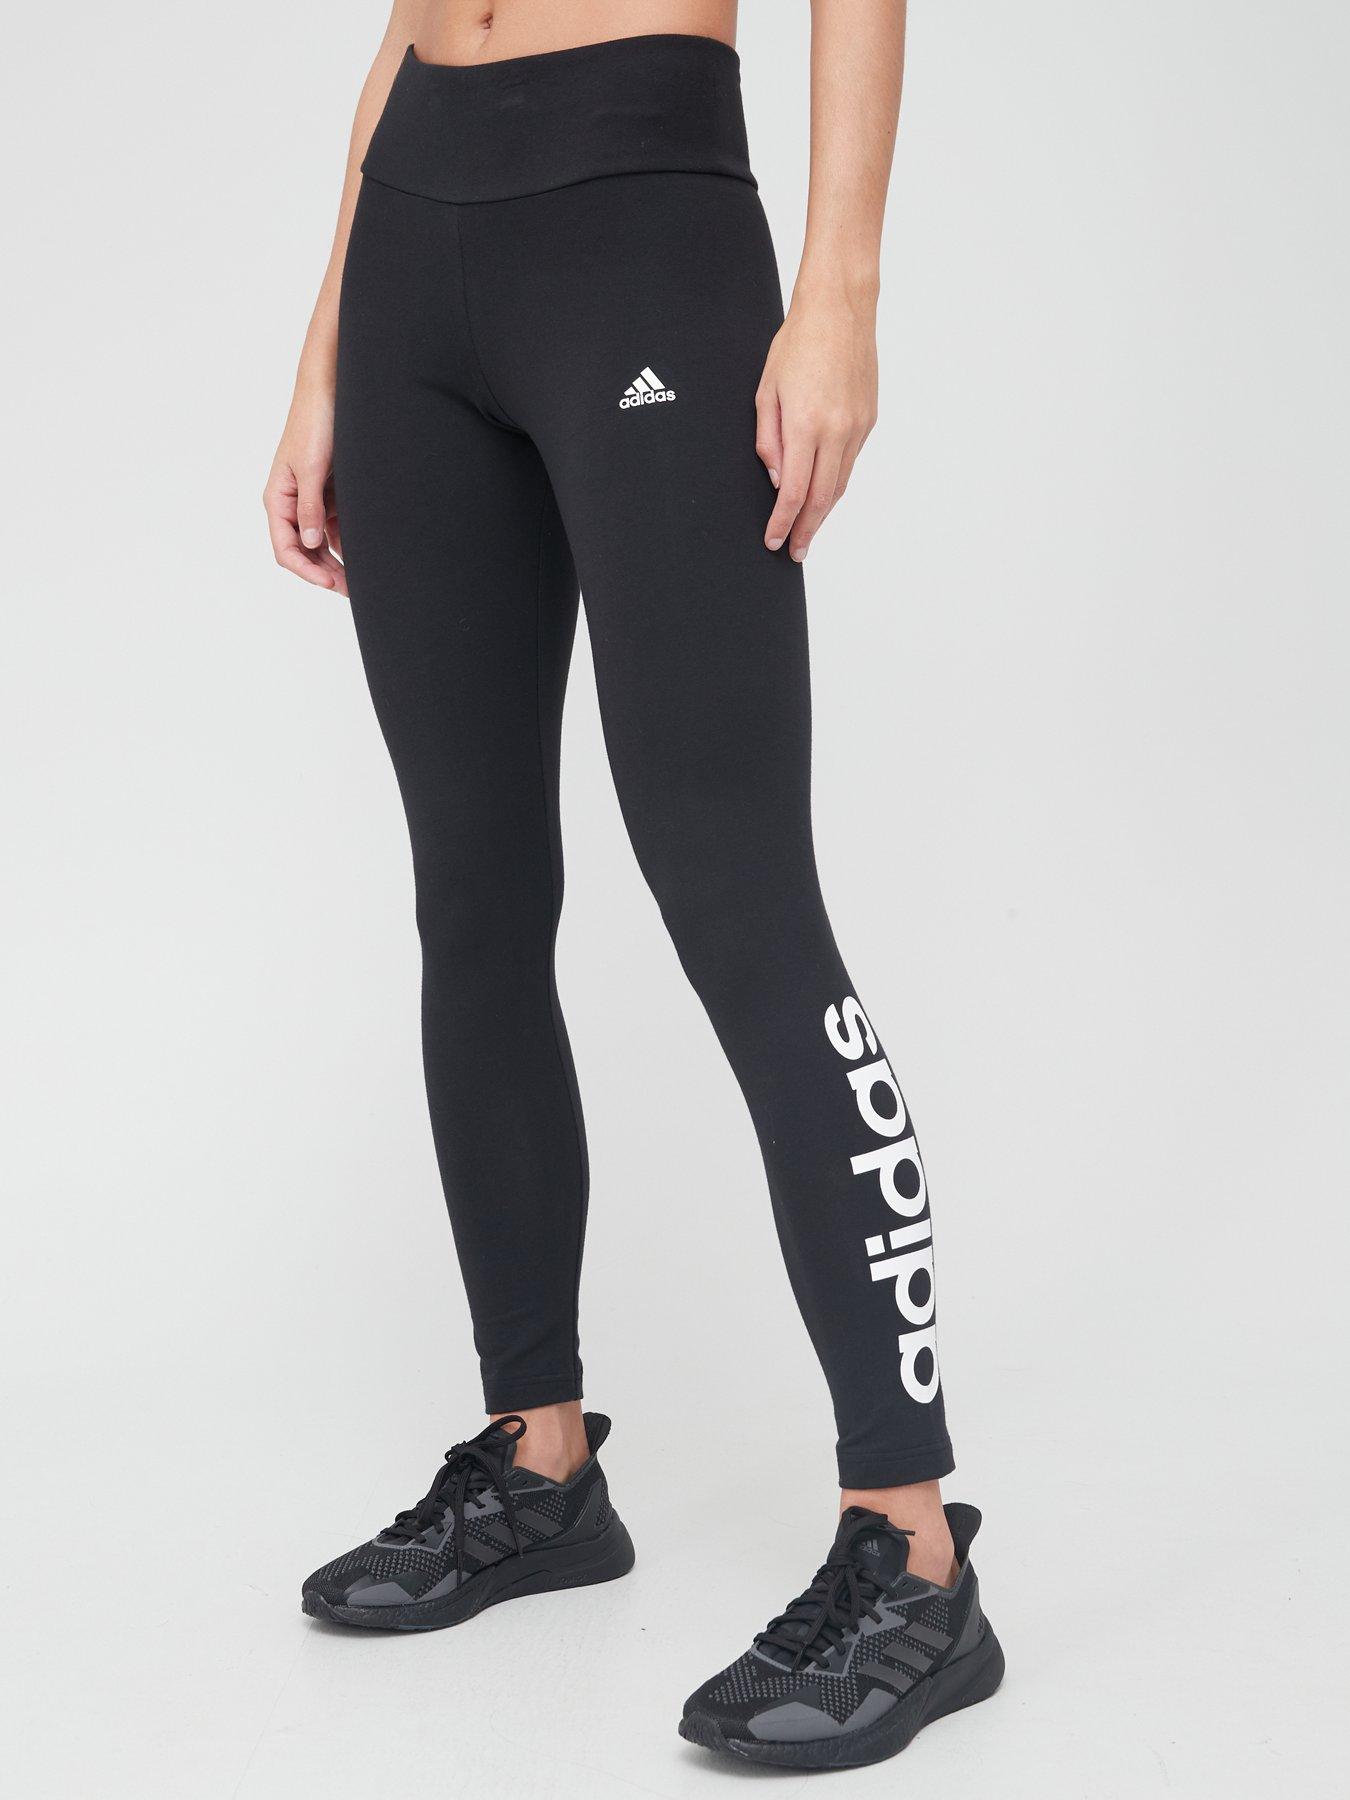 ADIDAS Womens Leggings UK 10 Small Black Cotton, Vintage & Second-Hand  Clothing Online